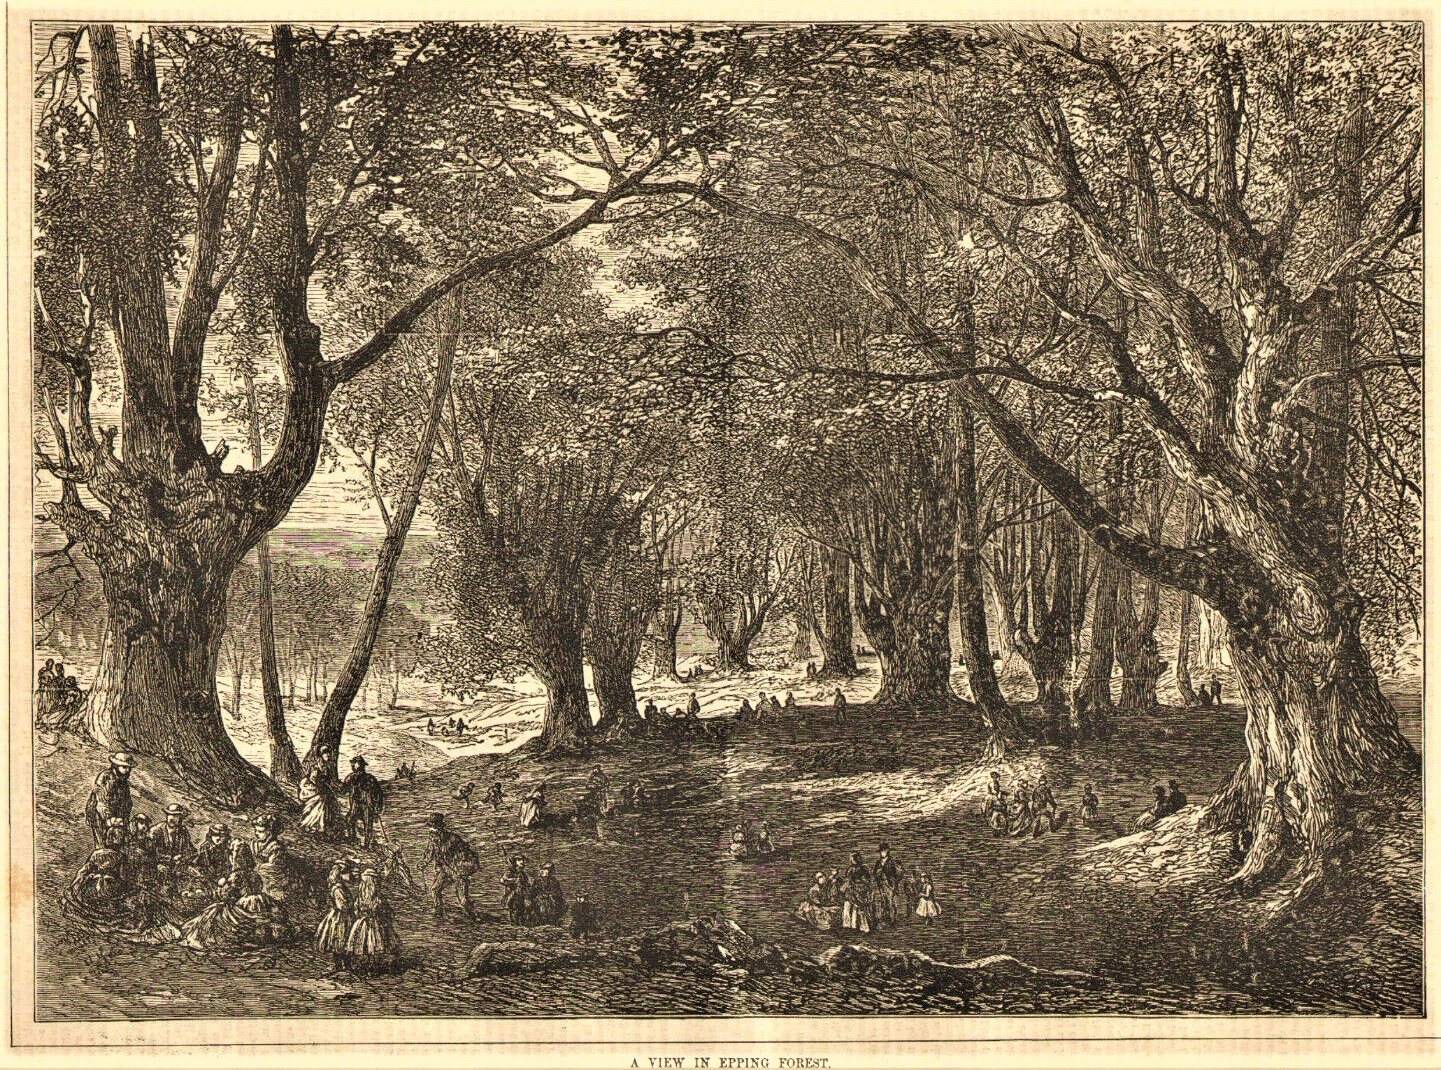 An illustration of Epping Forest in the 19th century. People are walking and sitting in groups, and the trees look enormous. The caption says "A view in EppingForest"